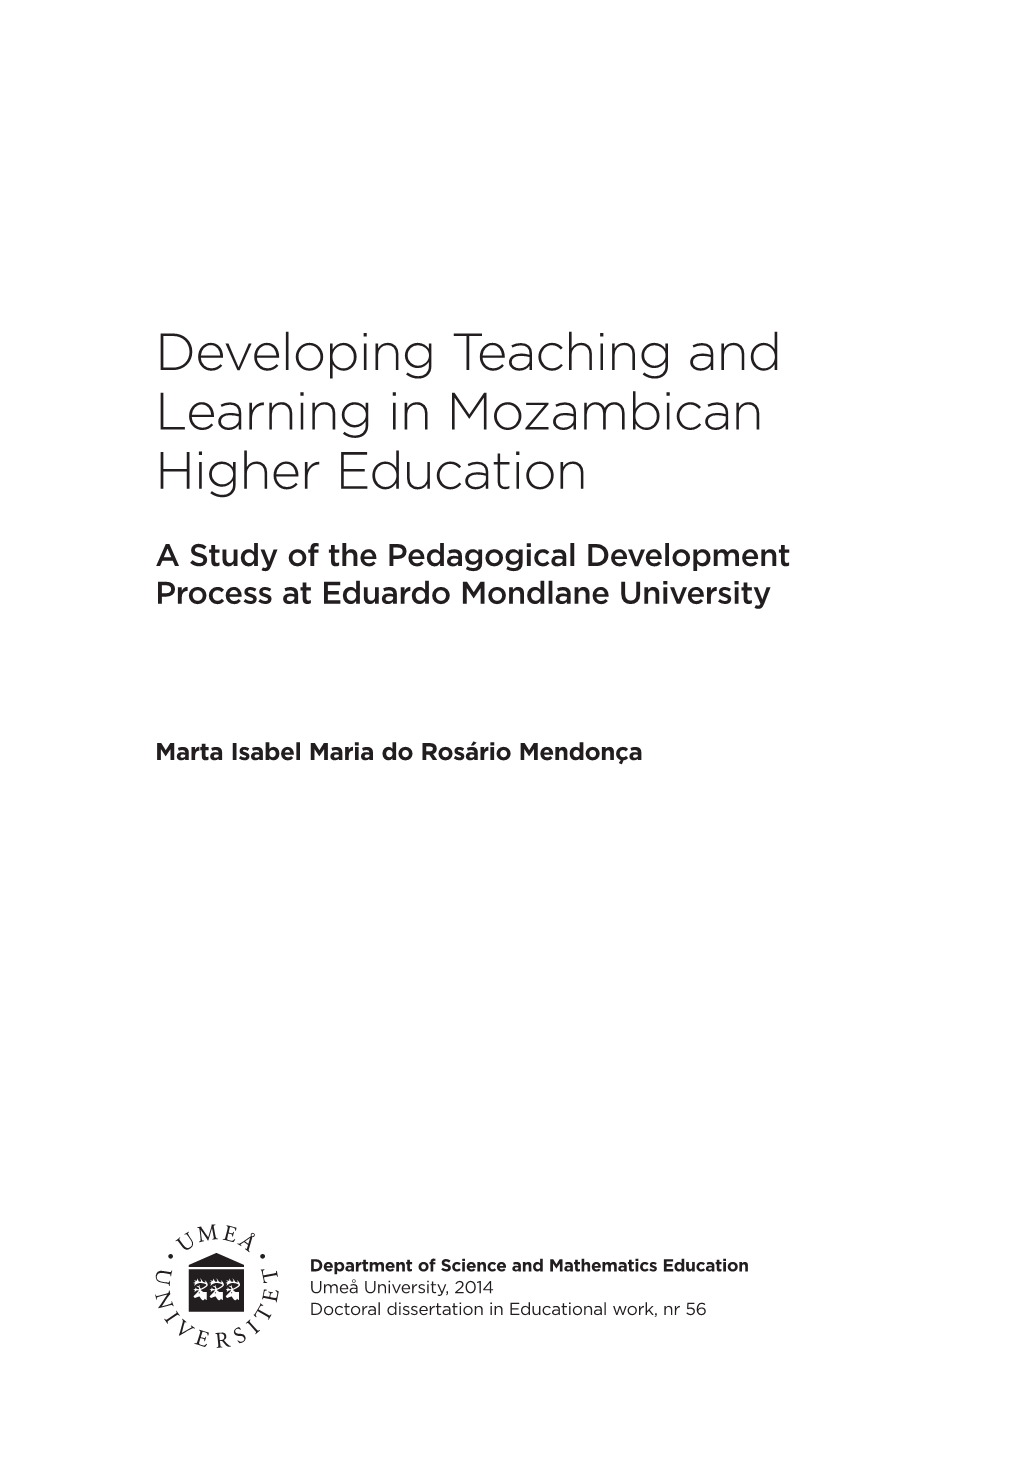 Developing Teaching and Learning in Mozambican Higher Education